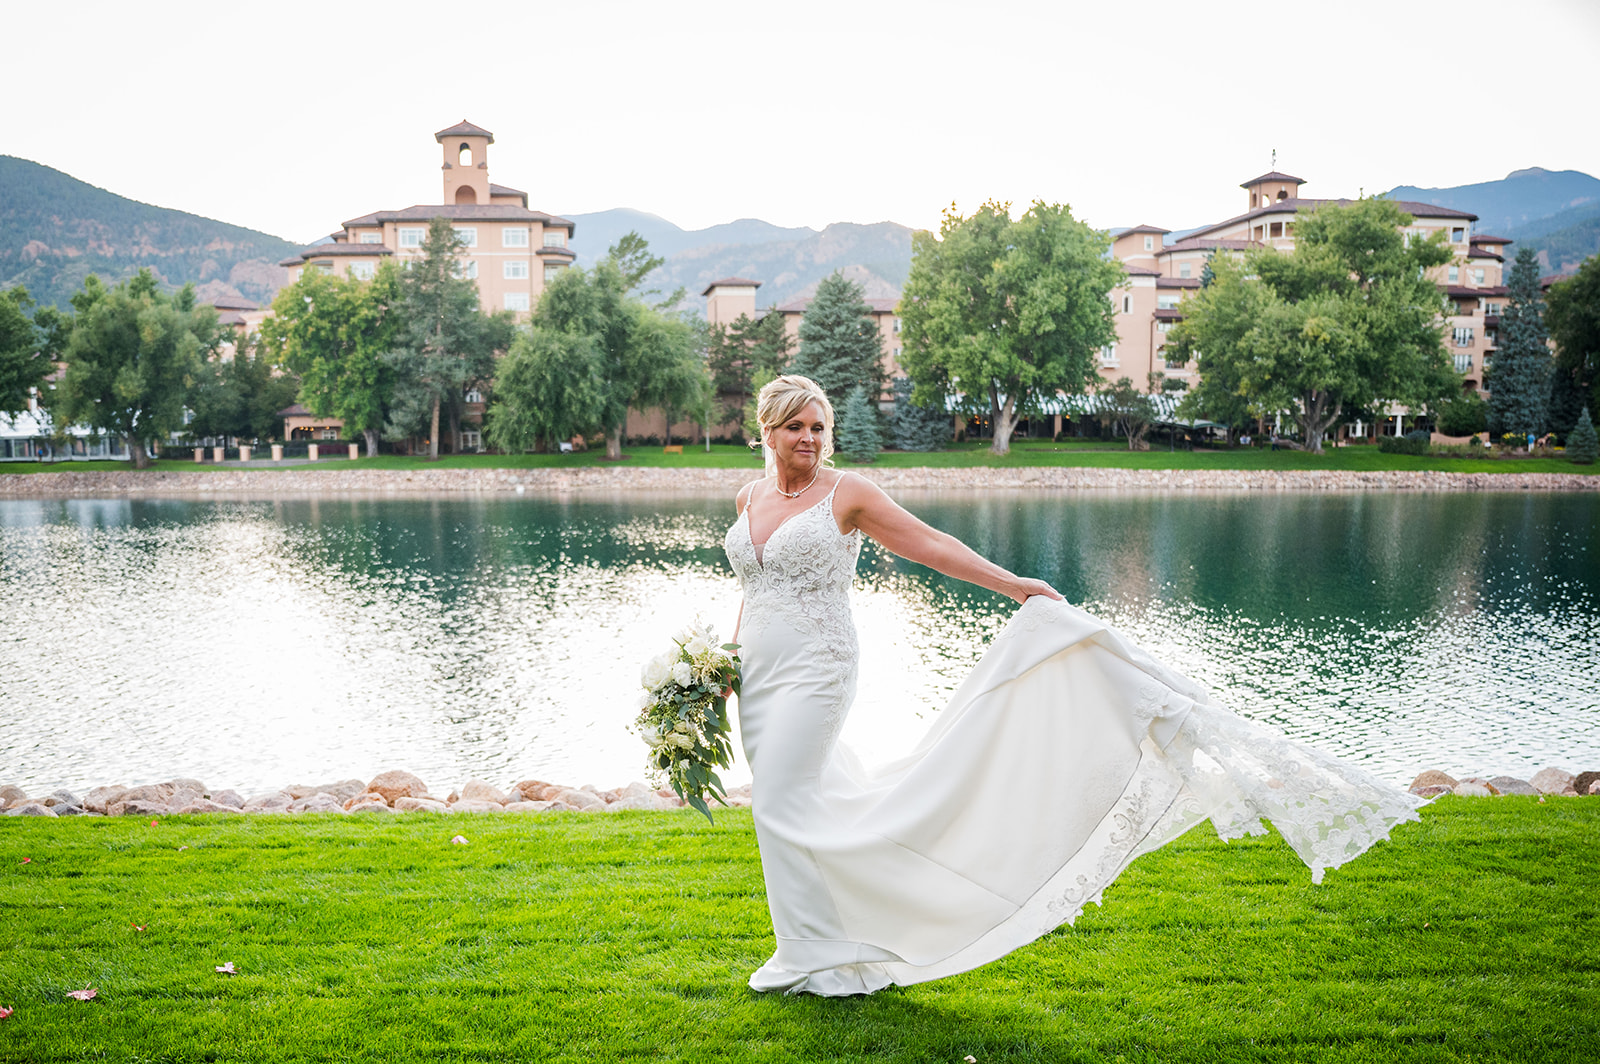 The bride twirls in her dress with the Broadmoor Hotel and lake in the background.